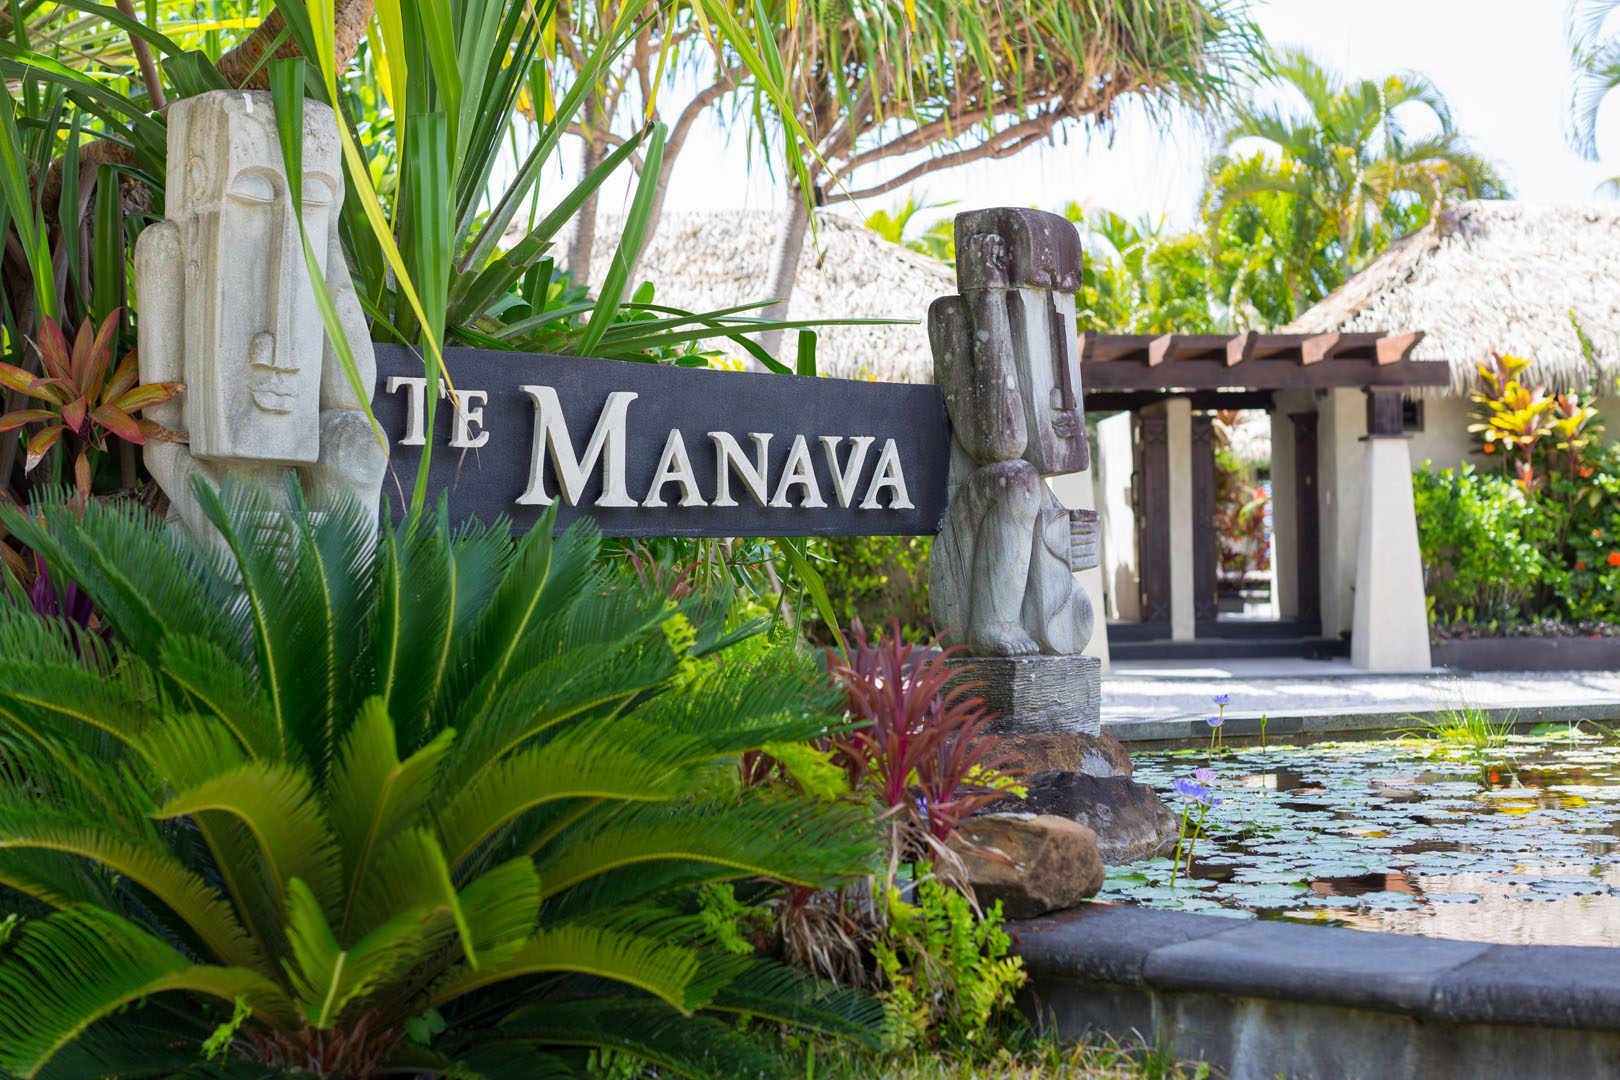 View of the te manava entrance surrounded by beautiful tropical gardens and pond